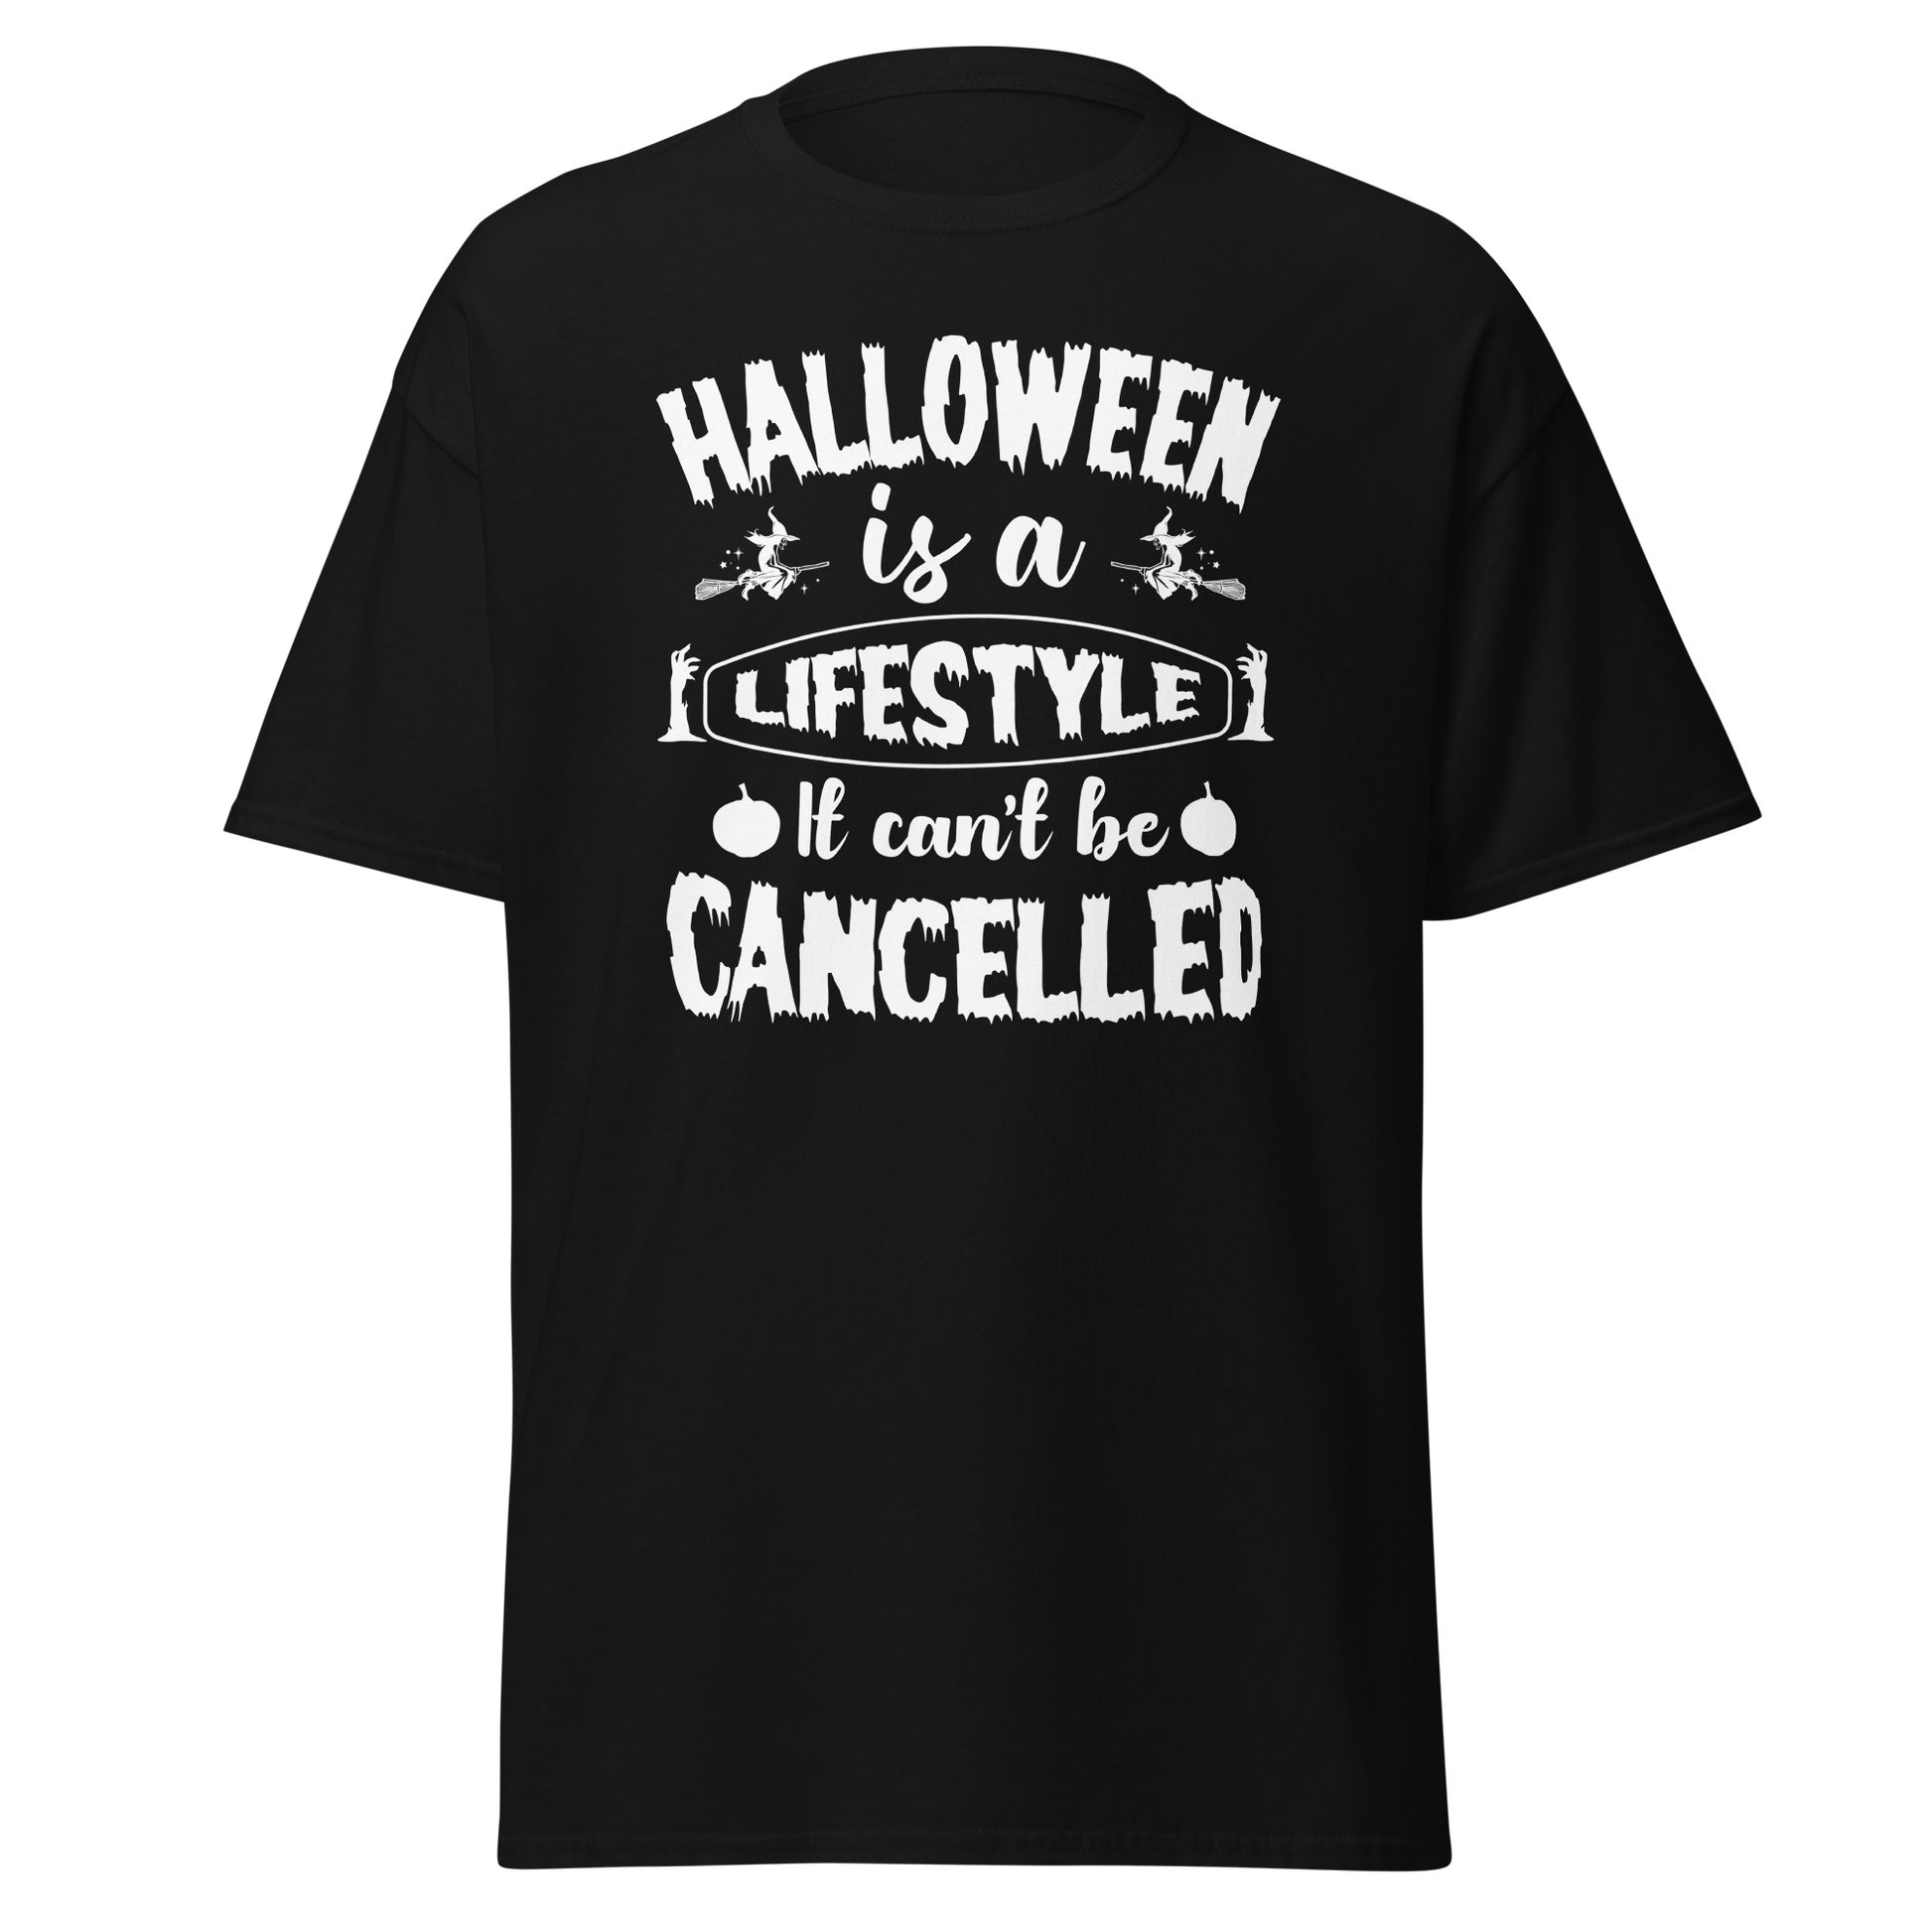 Halloween, More Than a Day, a Lifestyle Tee